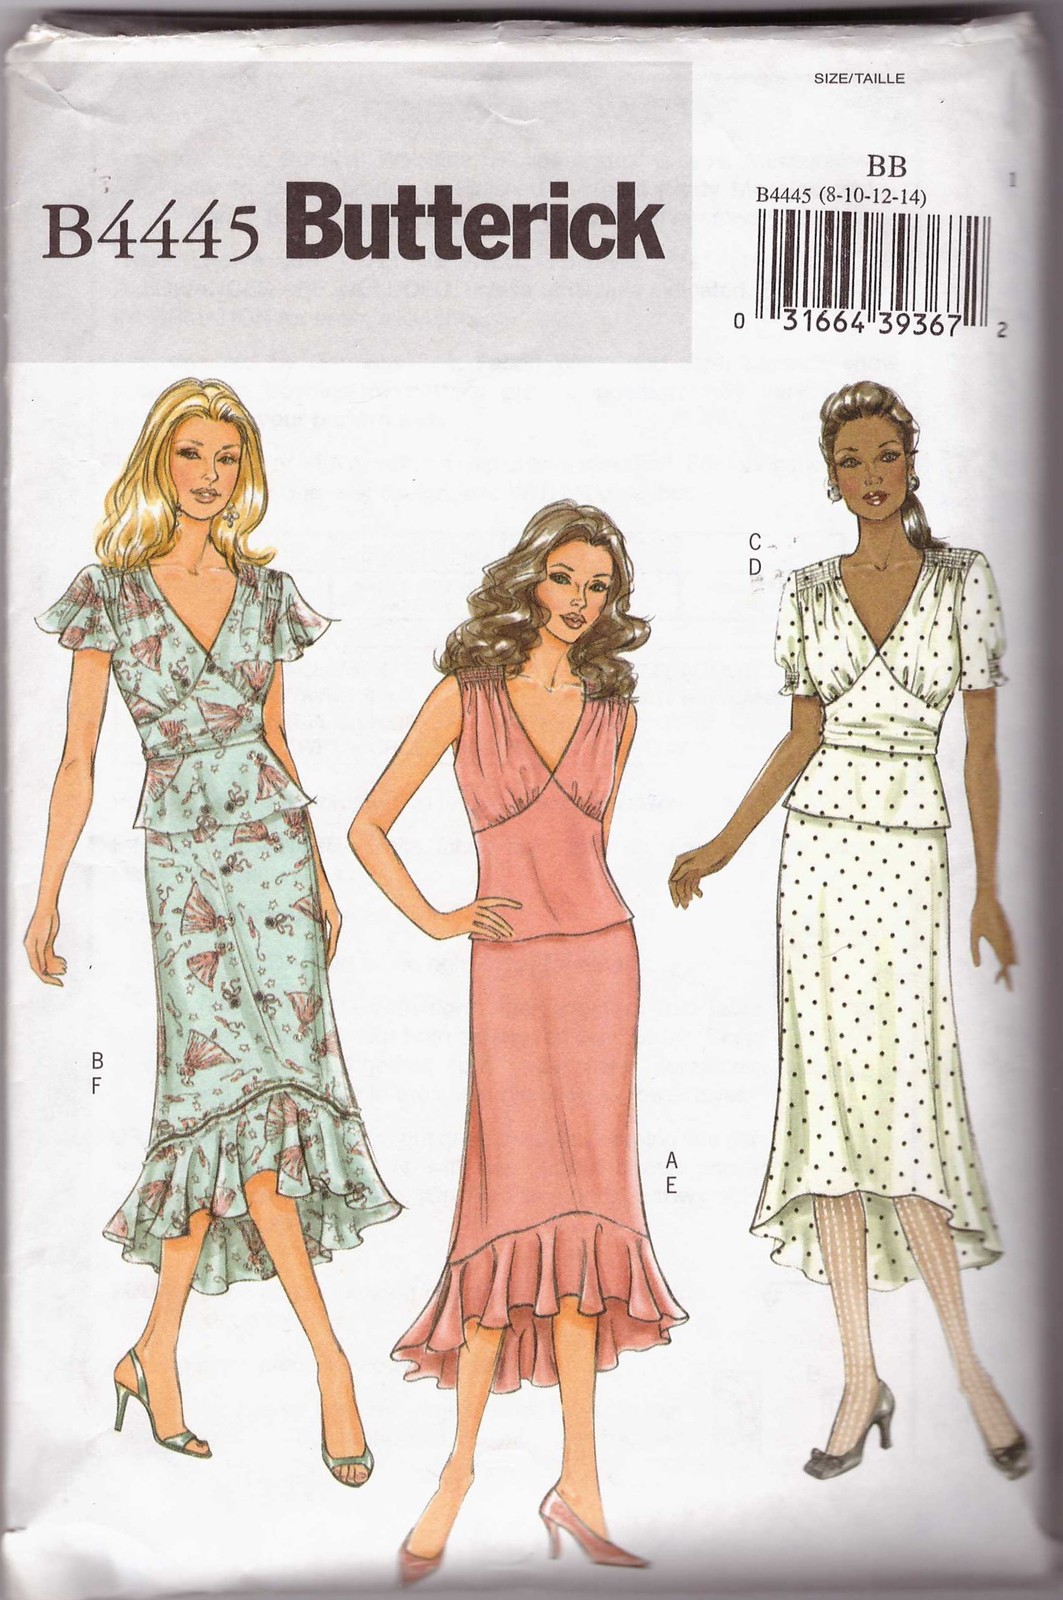 Butterick Sewing Pattern 4445 Misses Womens Top Skirt Dress Size 8 10 12 14 New - $9.99